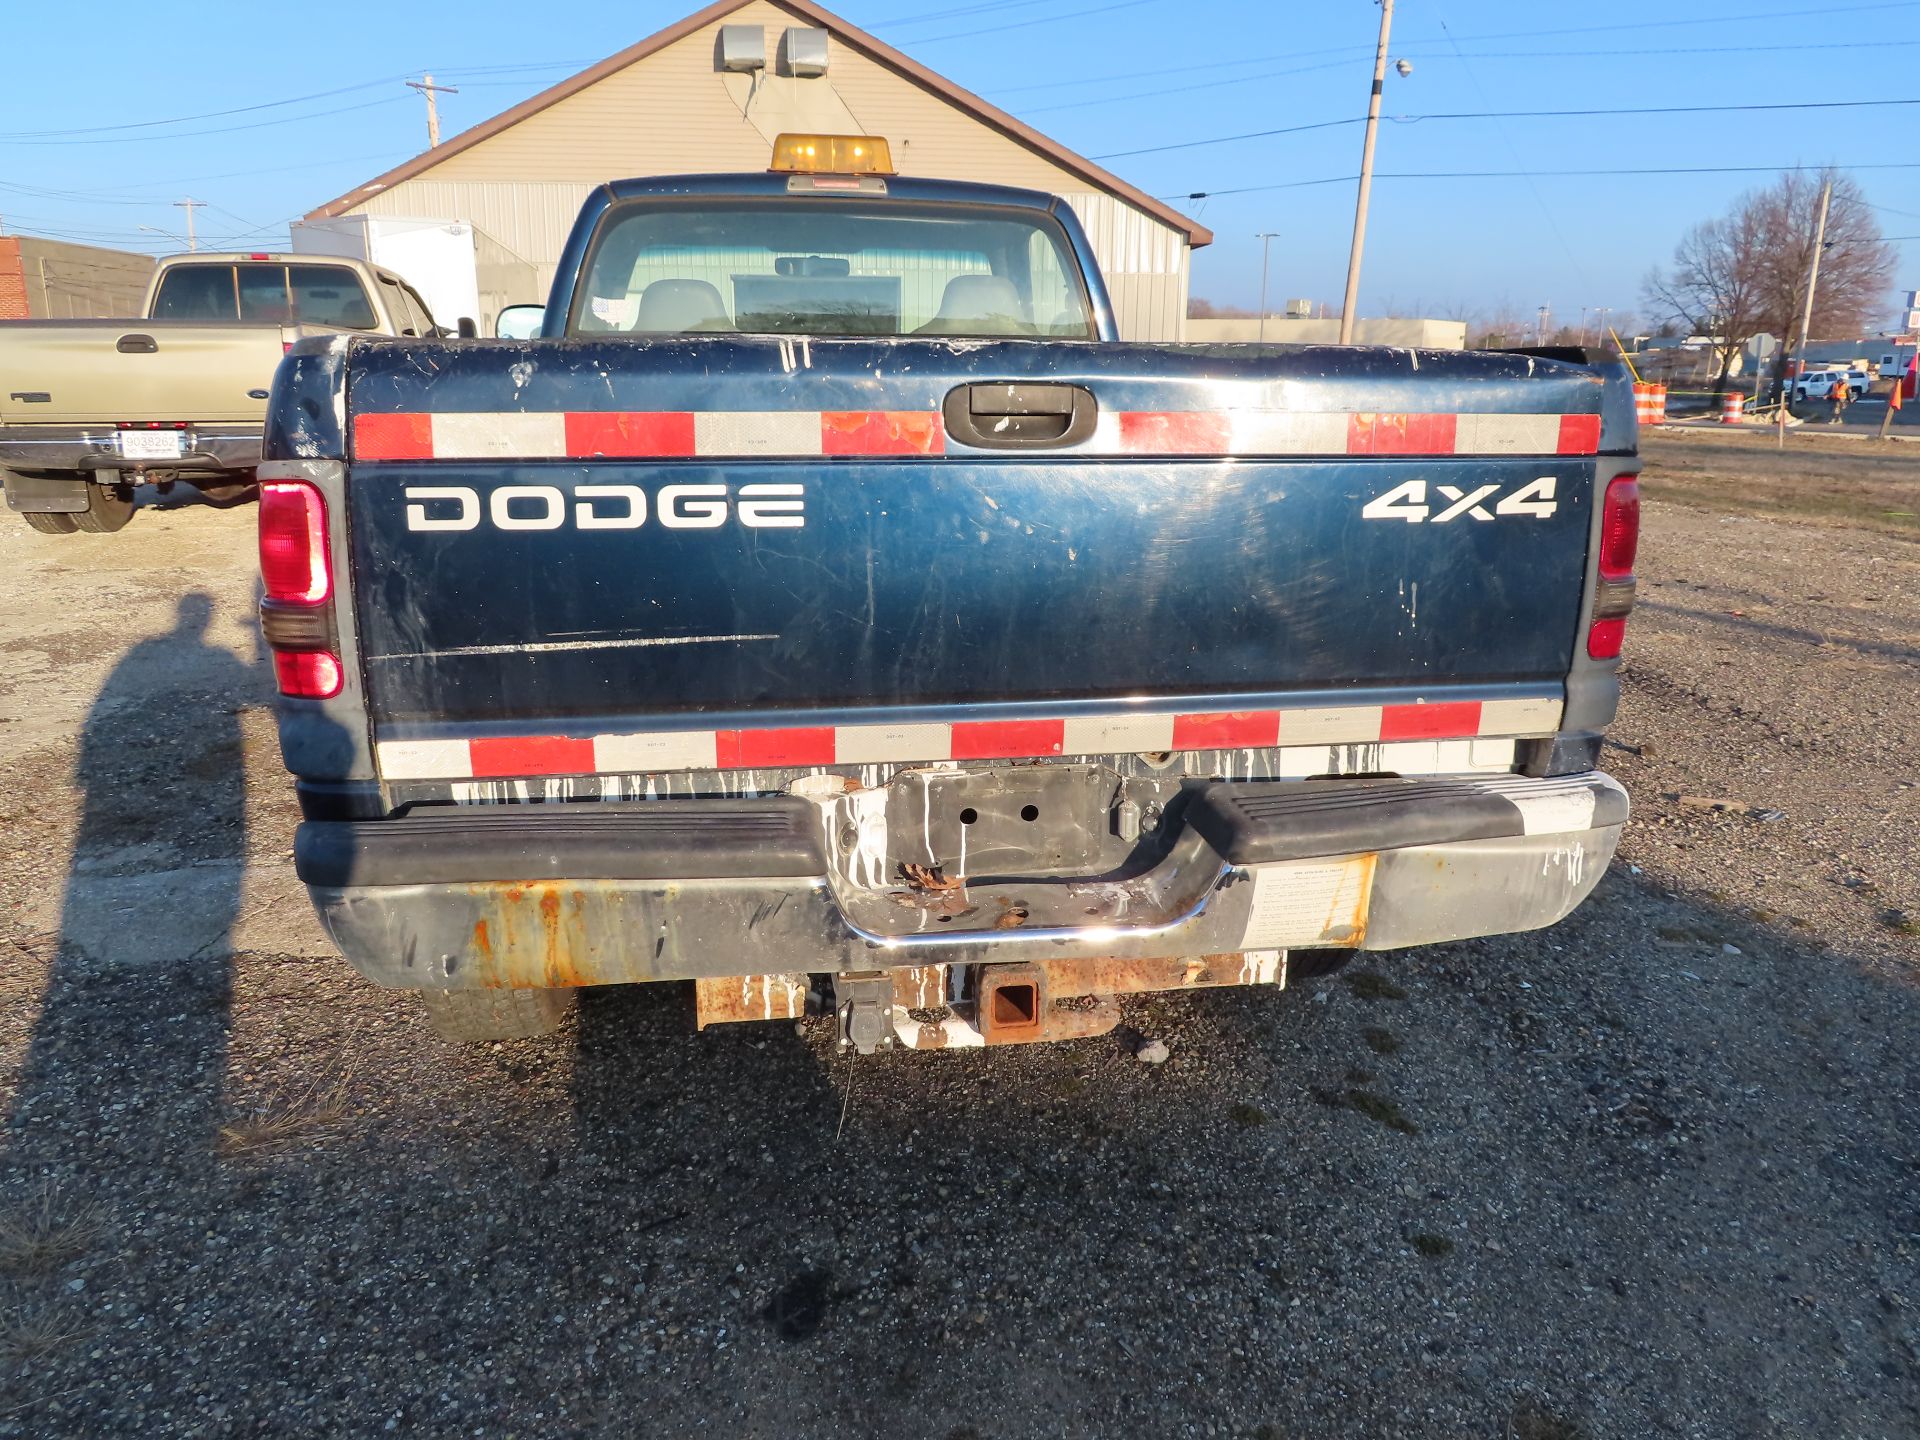 2002 Dodge Ram 2500 plow truck VIN 3B7KF26Z32M309373, 4wd, includes western plow with ultra-mount - Image 5 of 18